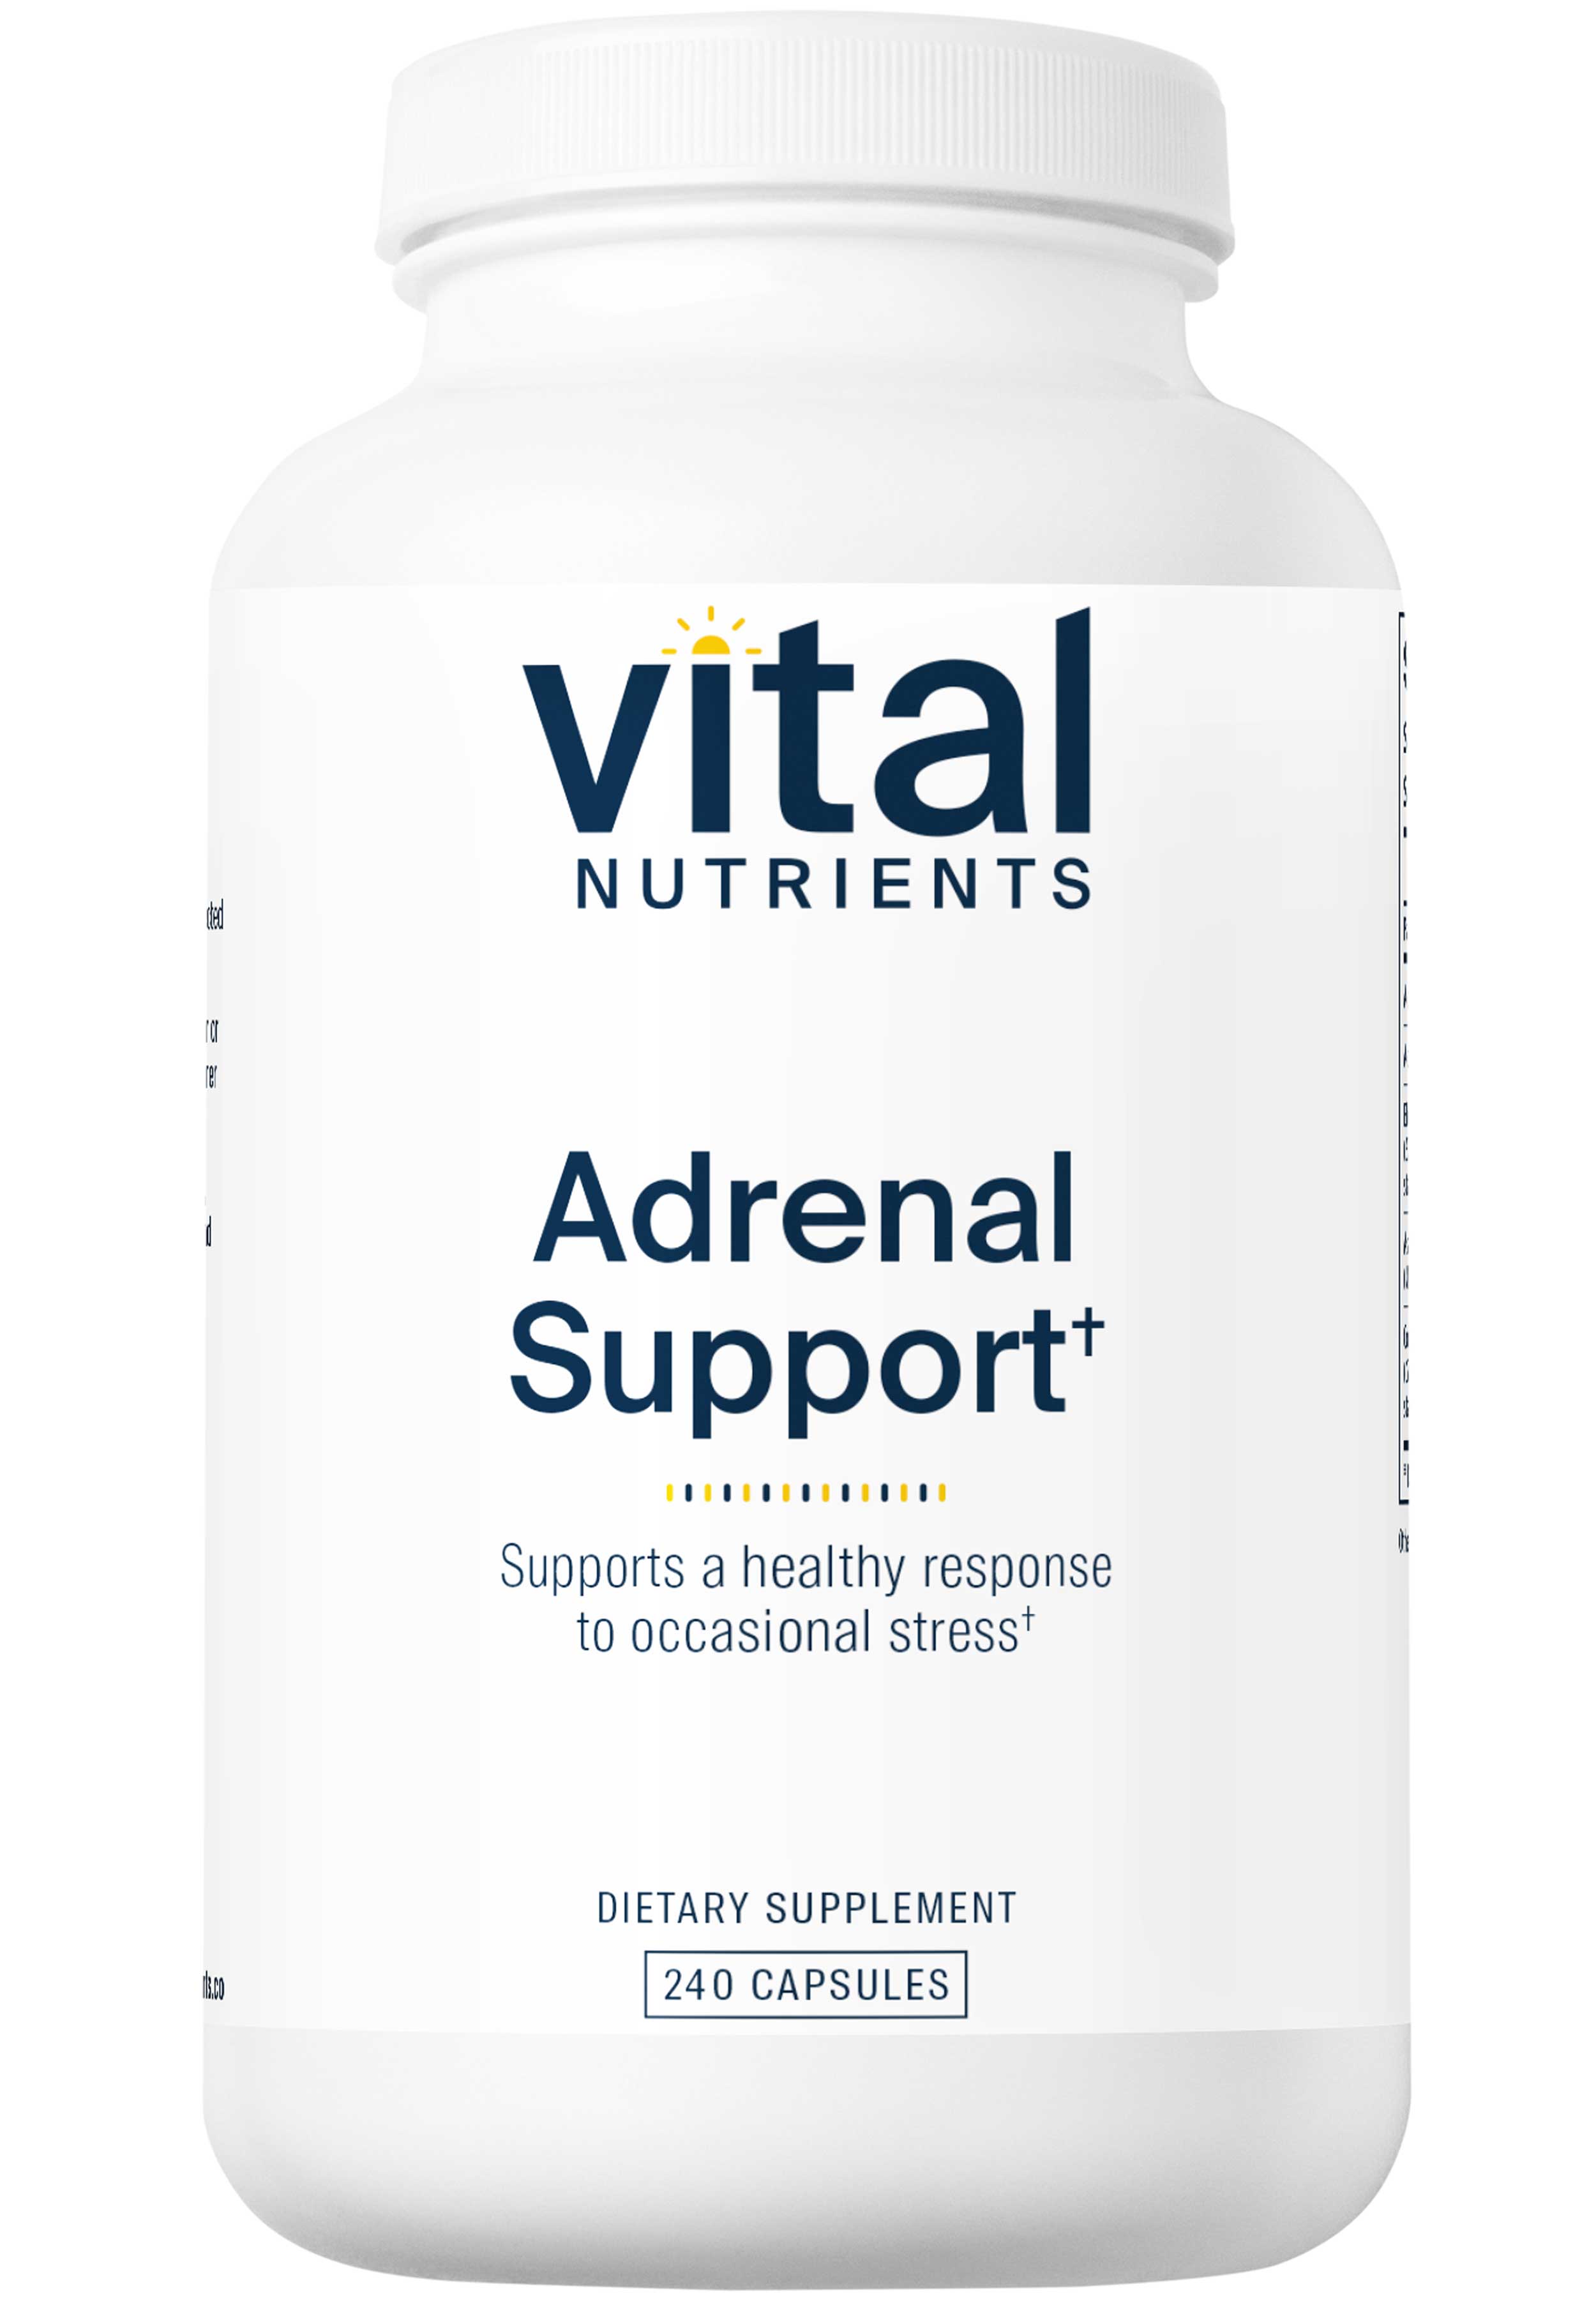 Vital Nutrients Adrenal Support